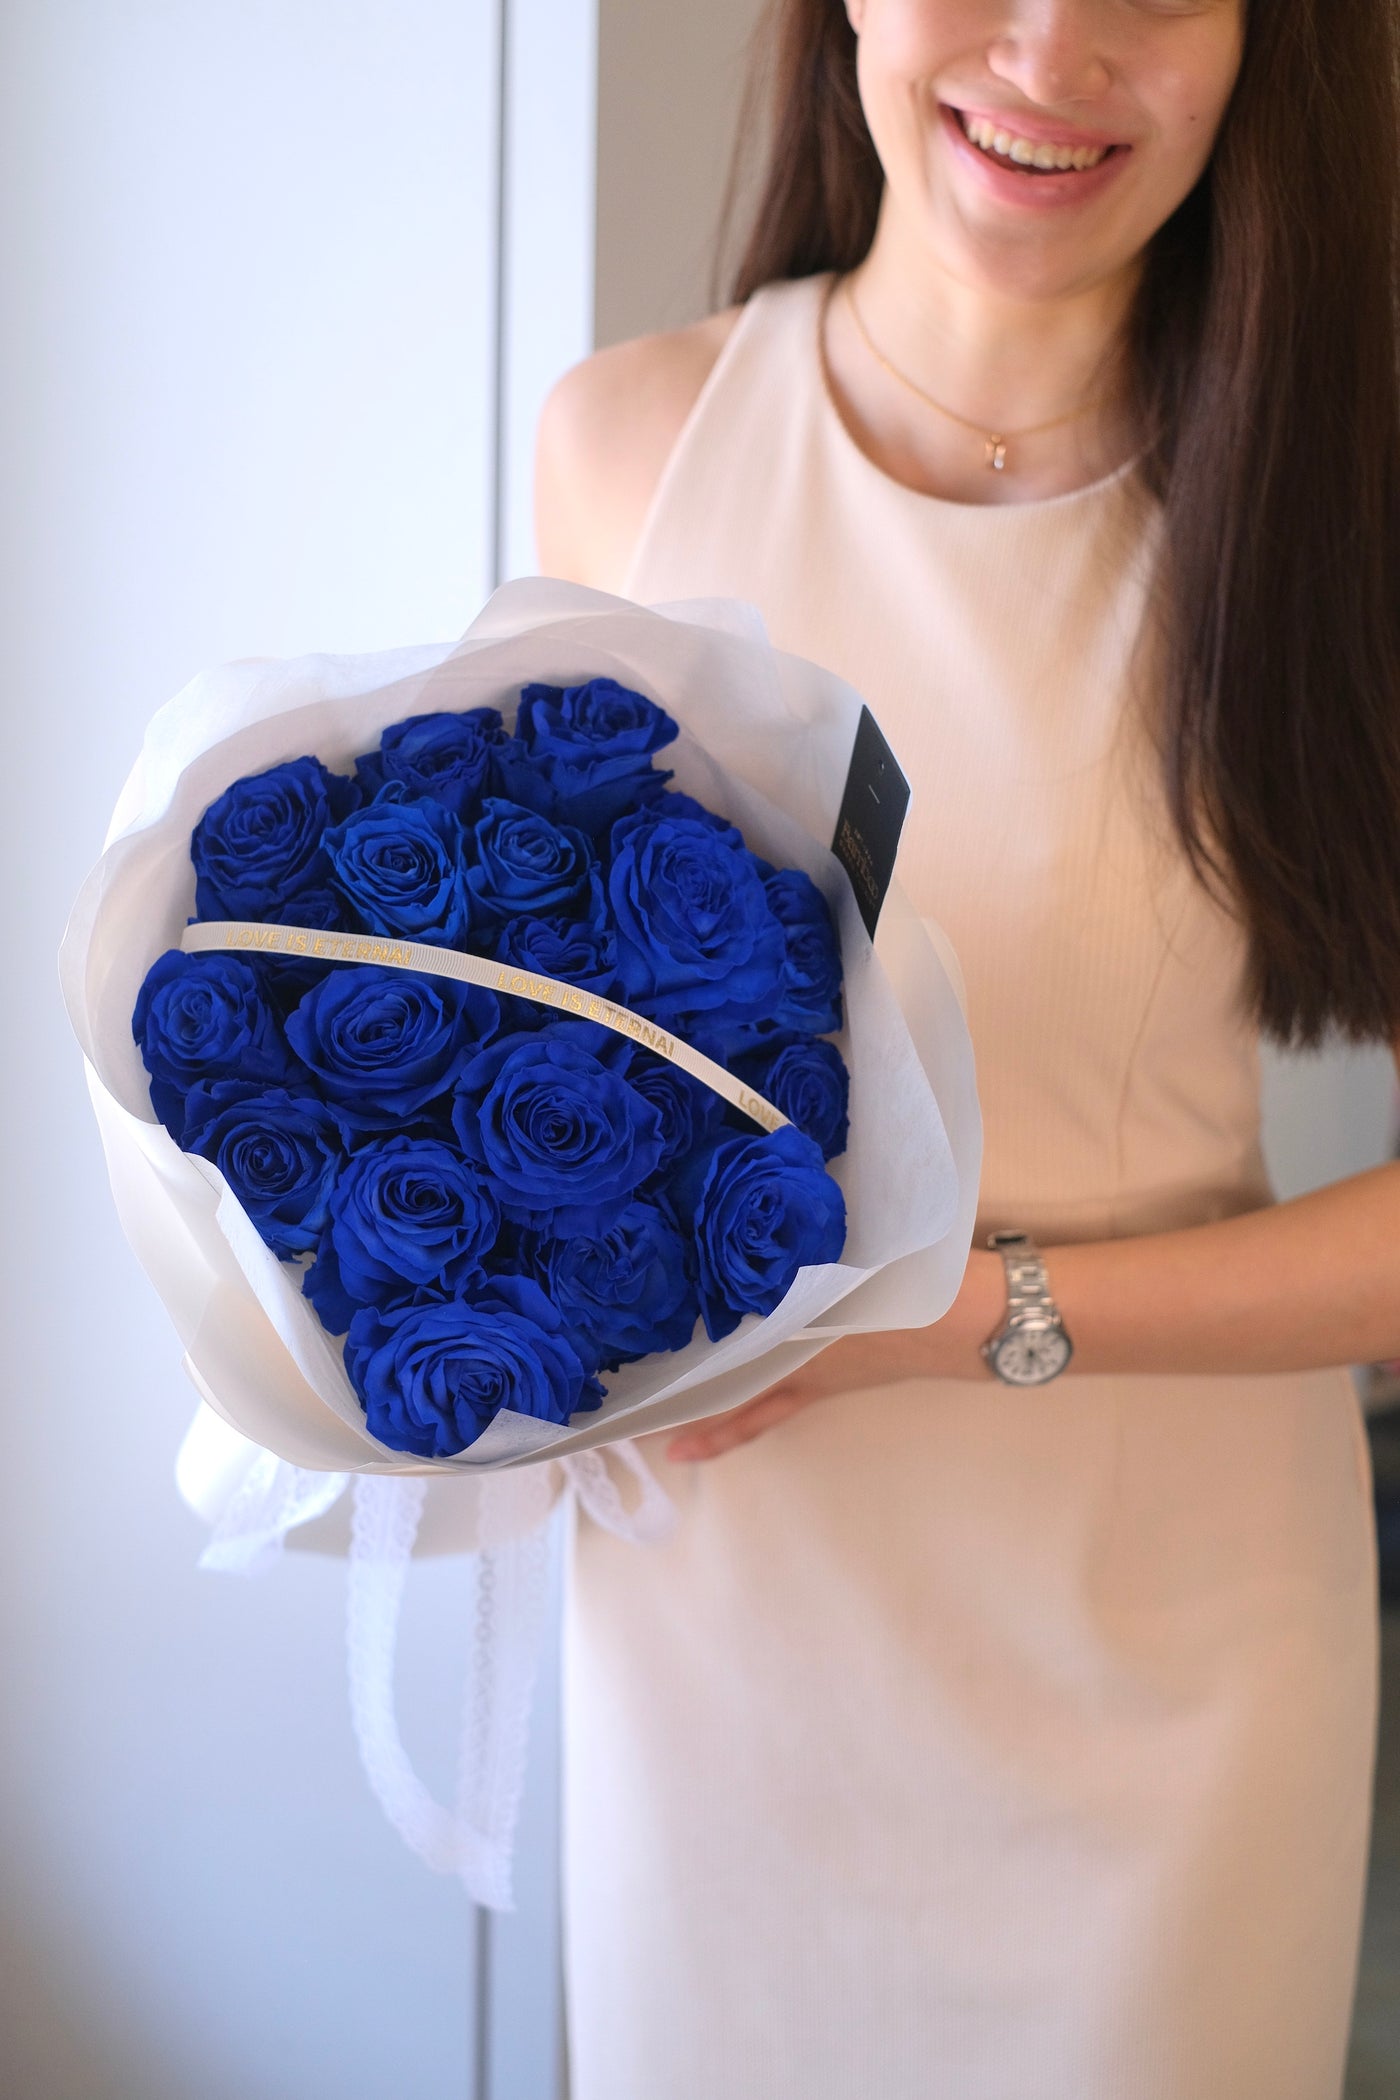 Shop blue roses in Penang with Bamboo Green Florist, fresh flowers delivery in Penang to yourdoorstep. 